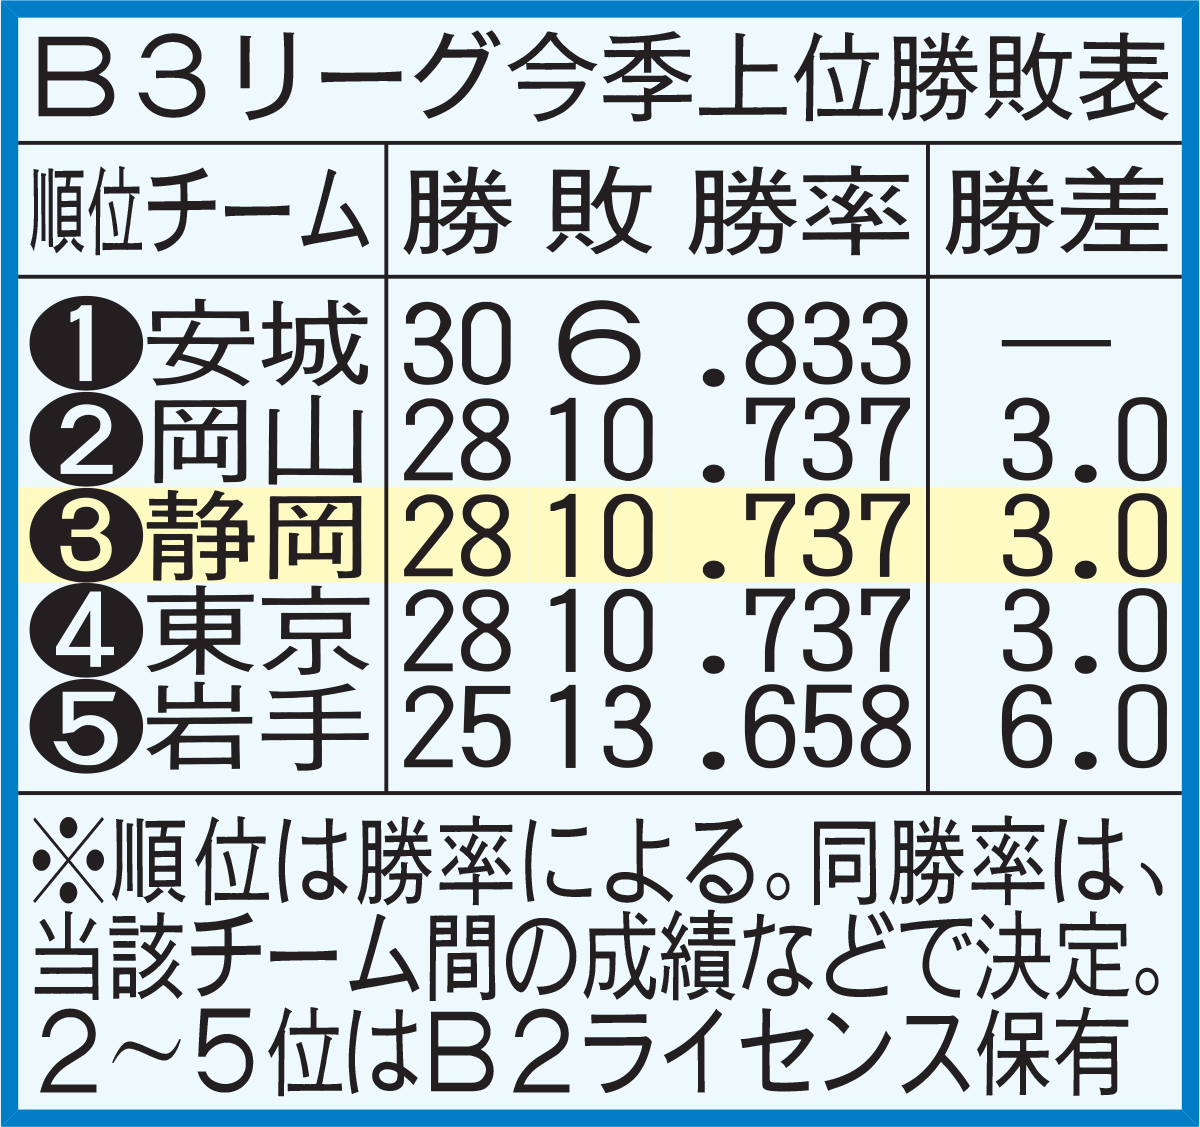 Ｂ３リーグ今季上位勝敗表